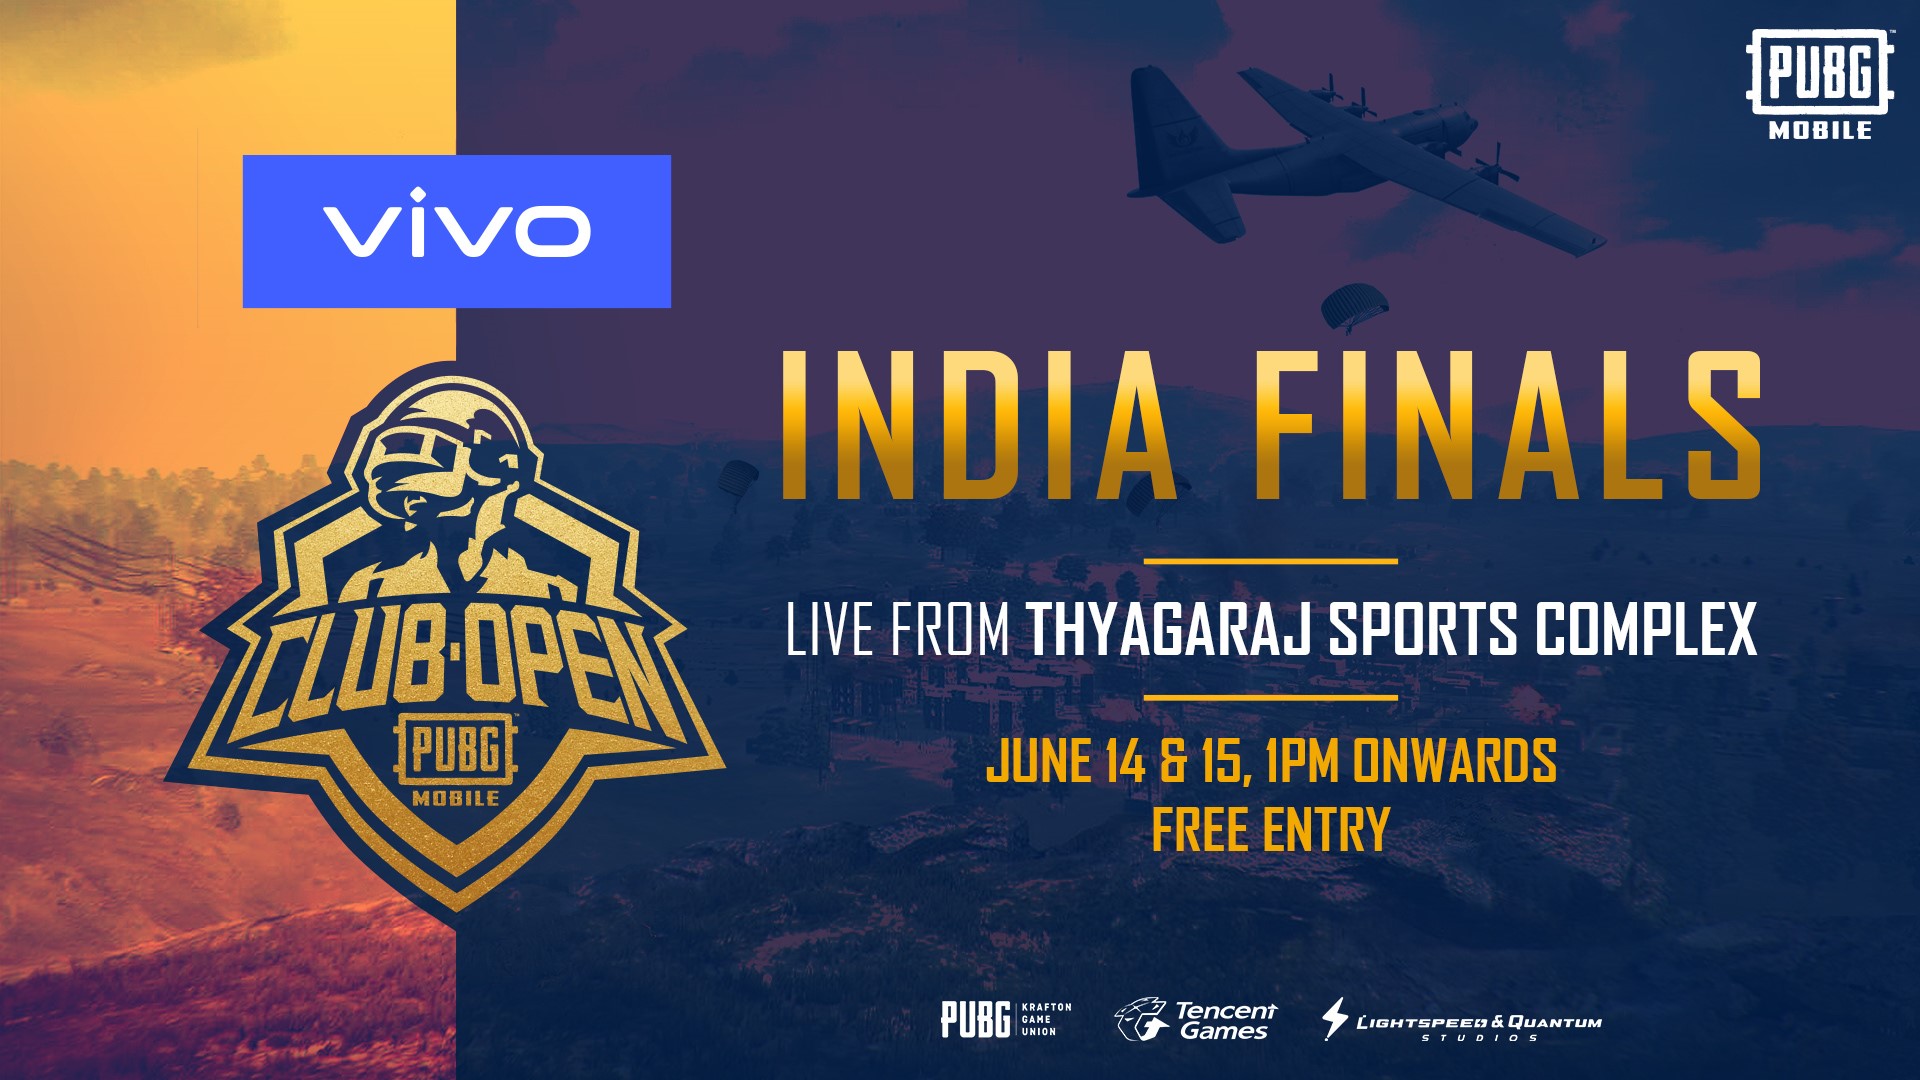 PUBG Mobile Club Open 2019 Indian Finals kicks off: here's ... - 